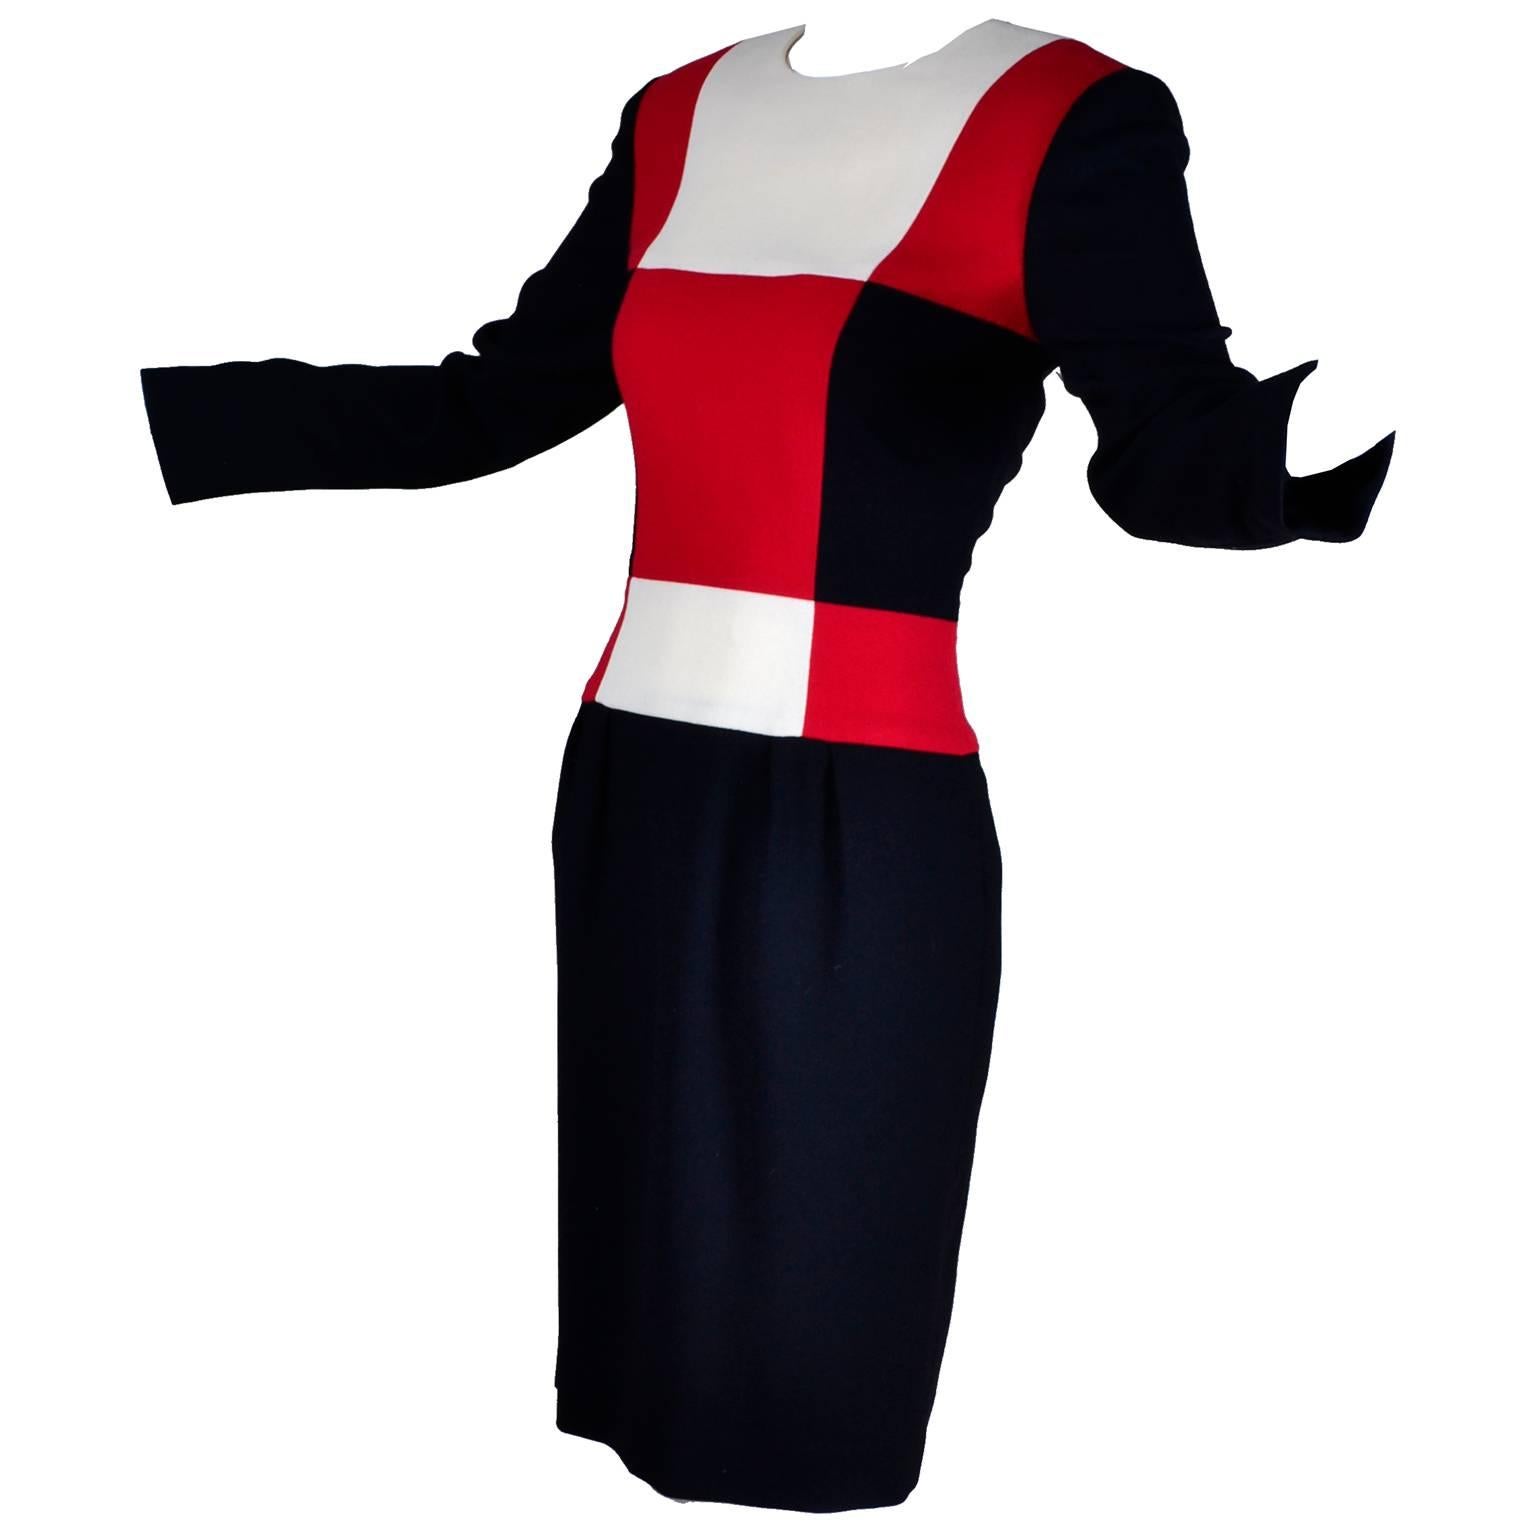 Scaasi 1980s Color Block Vintage Dress in Red Black and Cream